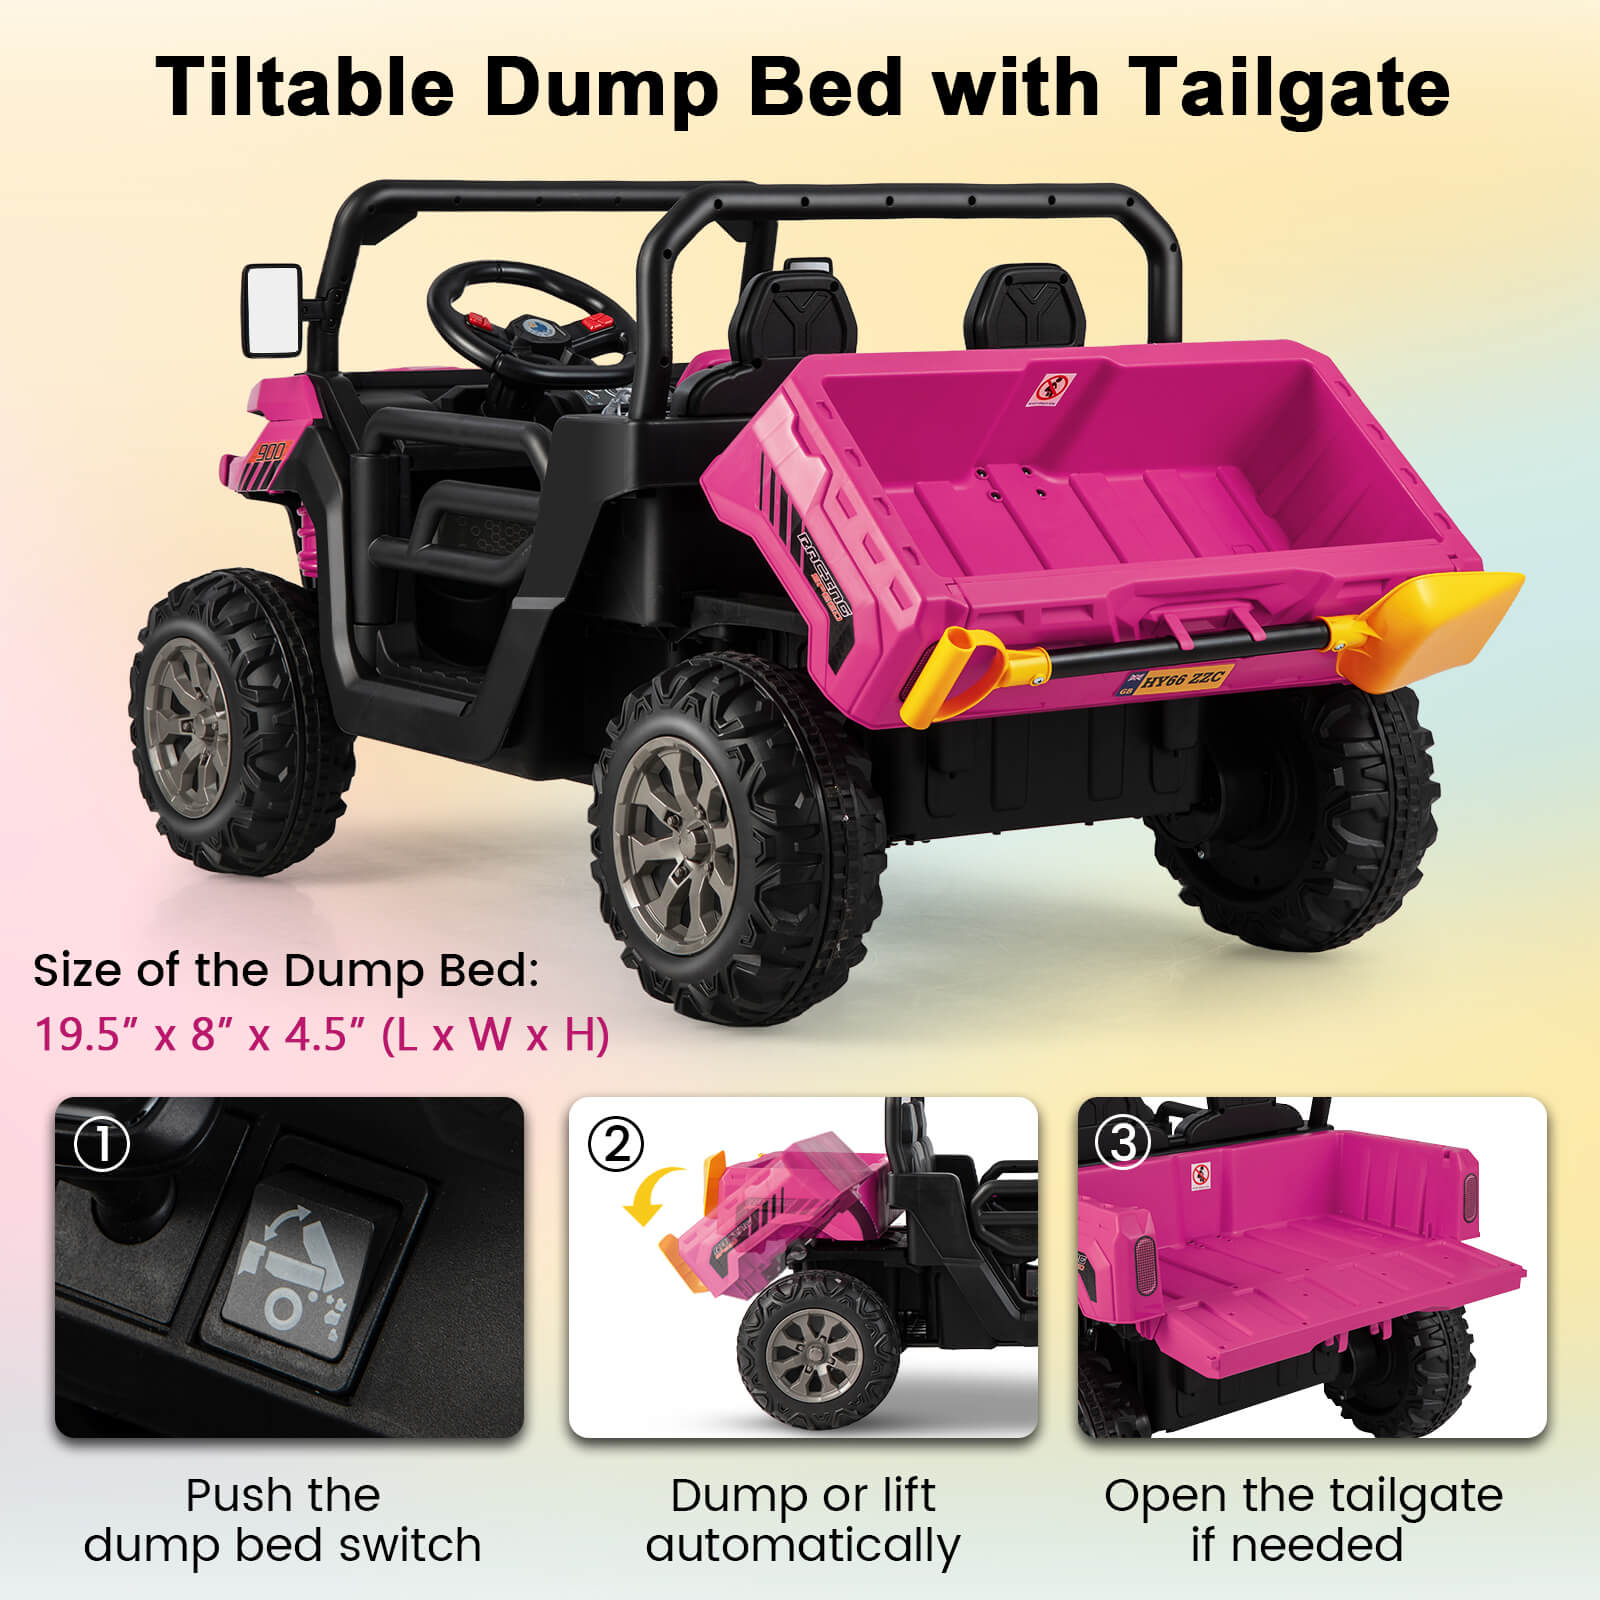 Automatic Dump Bed and Extra Shovel: Elevate your child's playtime with the unique tiltable dump bed, allowing for automatic dumping and lifting at the push of a switch. Equipped with an additional shovel, little ones can have endless fun loading sand, collecting fallen leaves, and more.